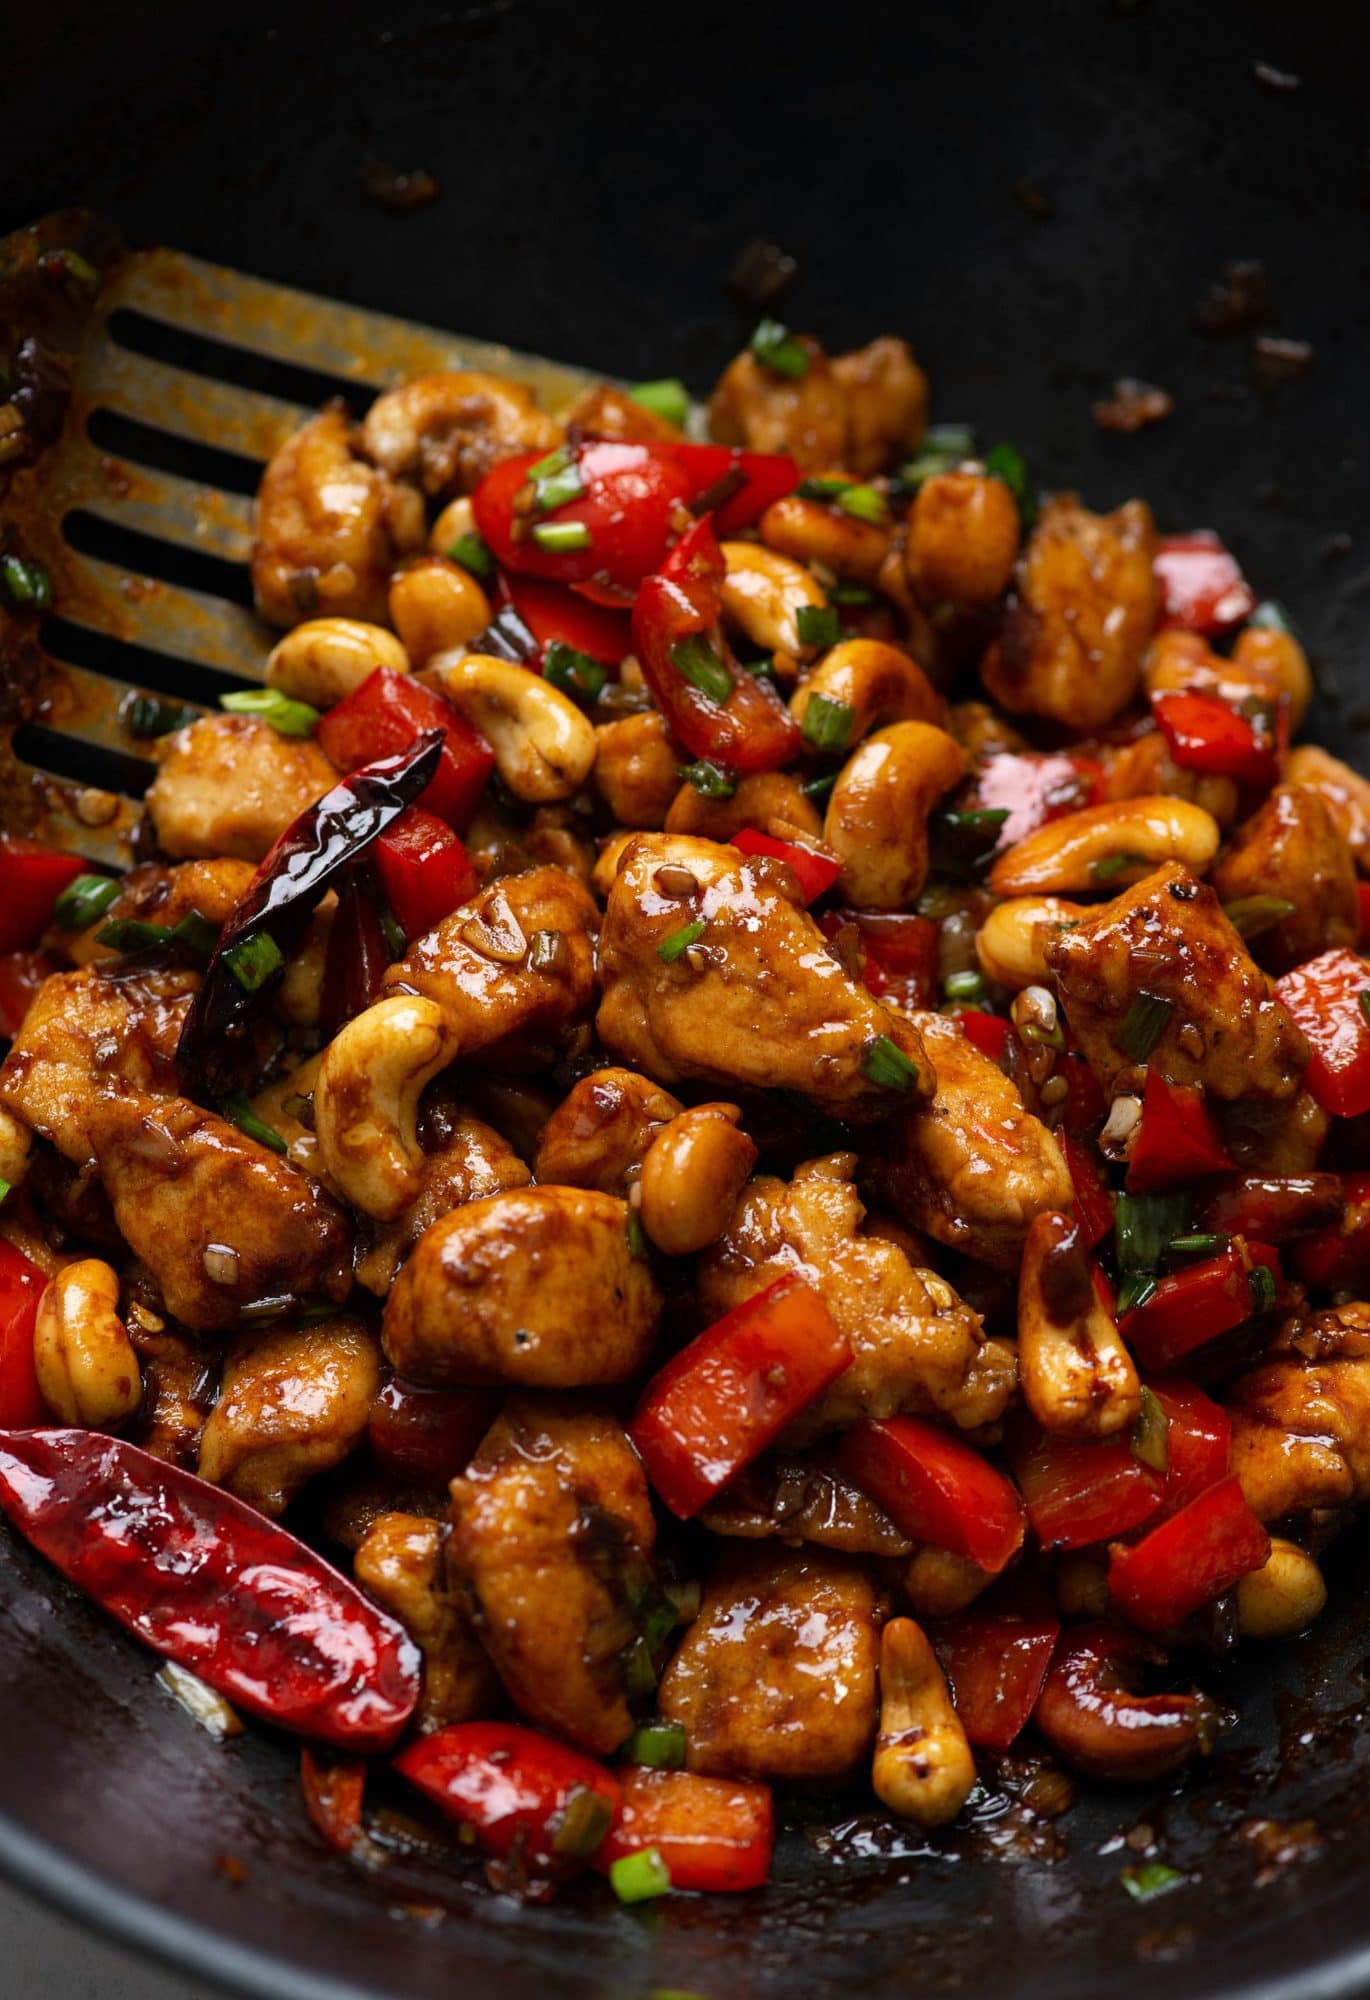 Thai Chicken Stir fry recipe is packed with thai flavors and has roasted cashews, peppers and chilies.